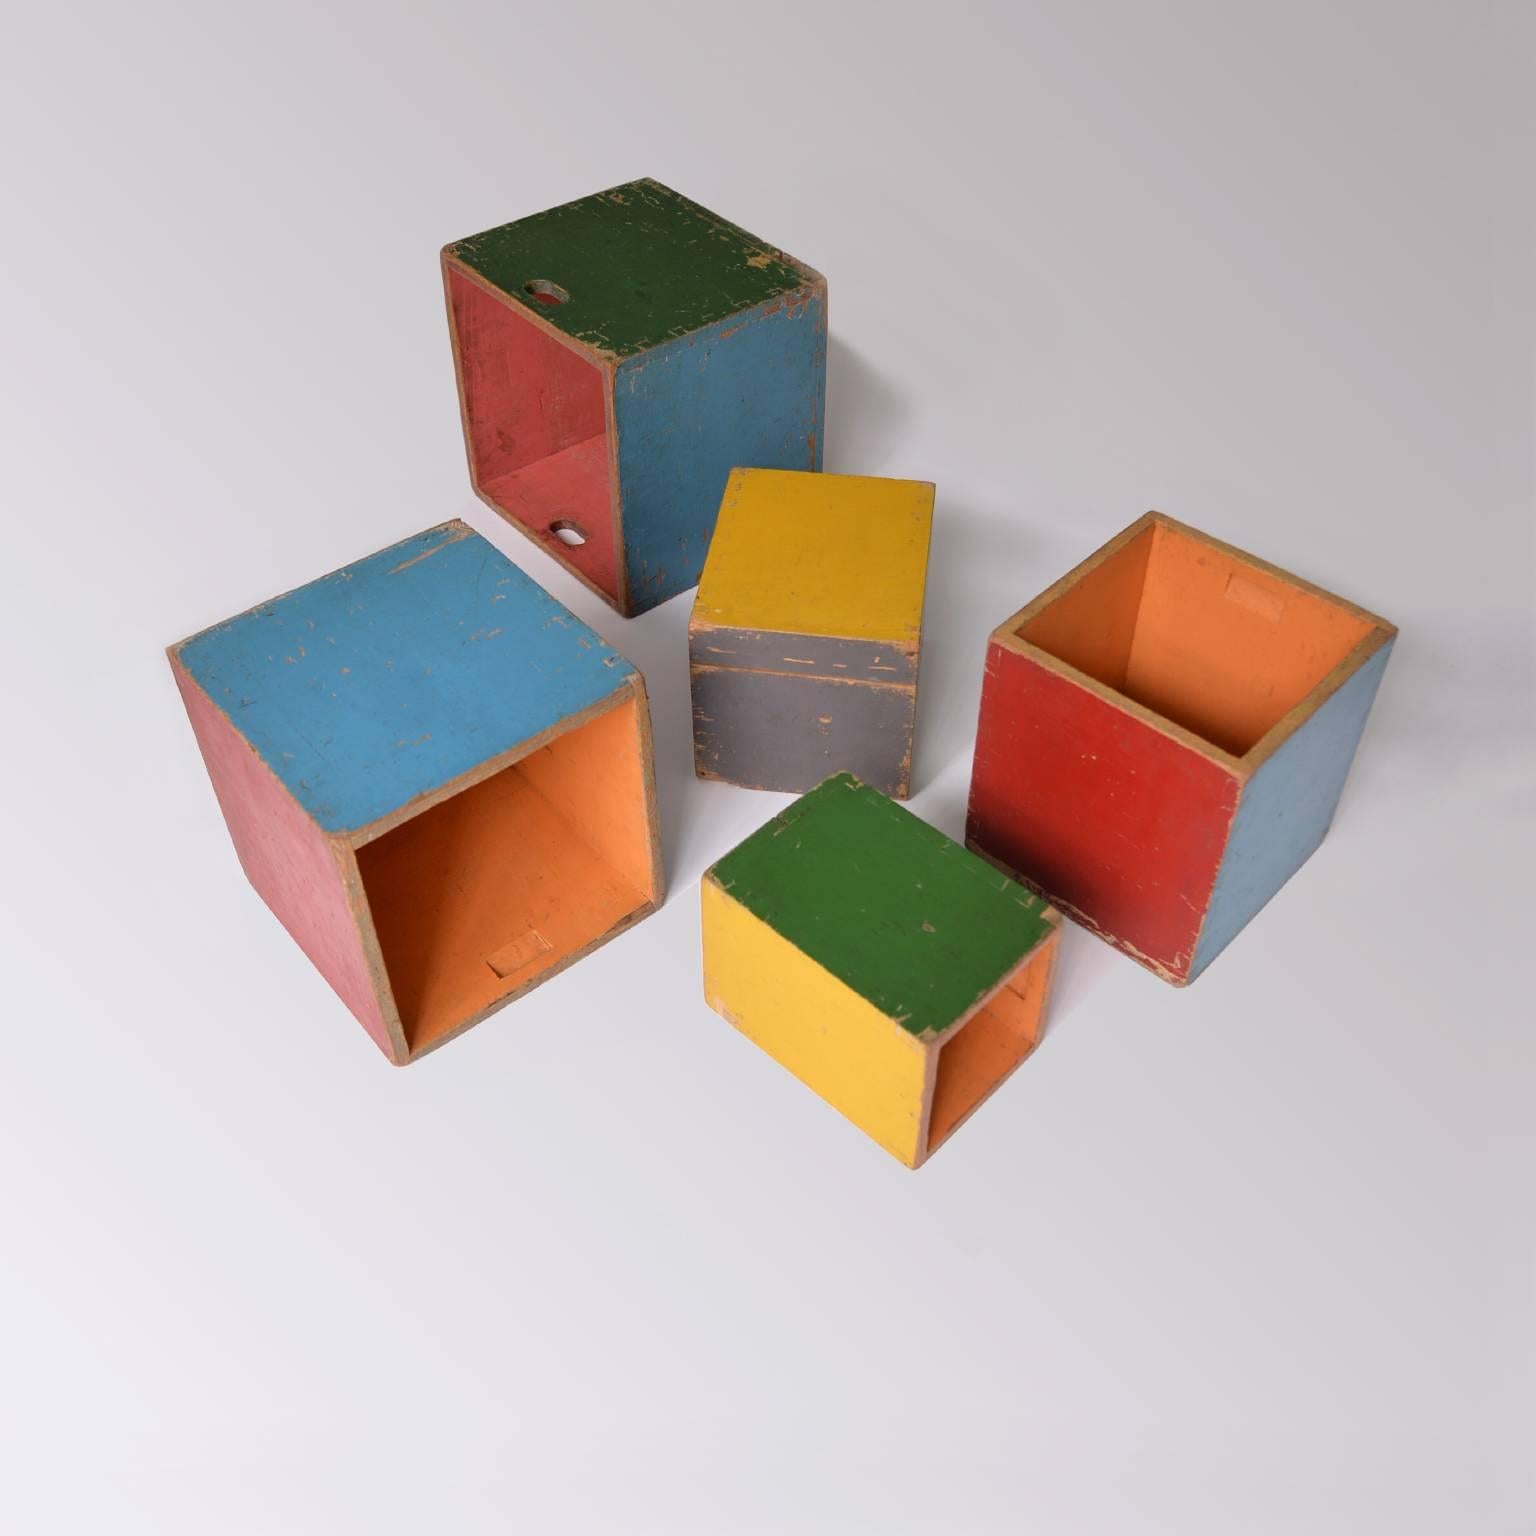 Bauhaus children's play boxes attributed to Alma Siedhoff-Buscher and executed at the carpentry workshop of the Bauhaus school in Weimar or Dessau, circa 1925.